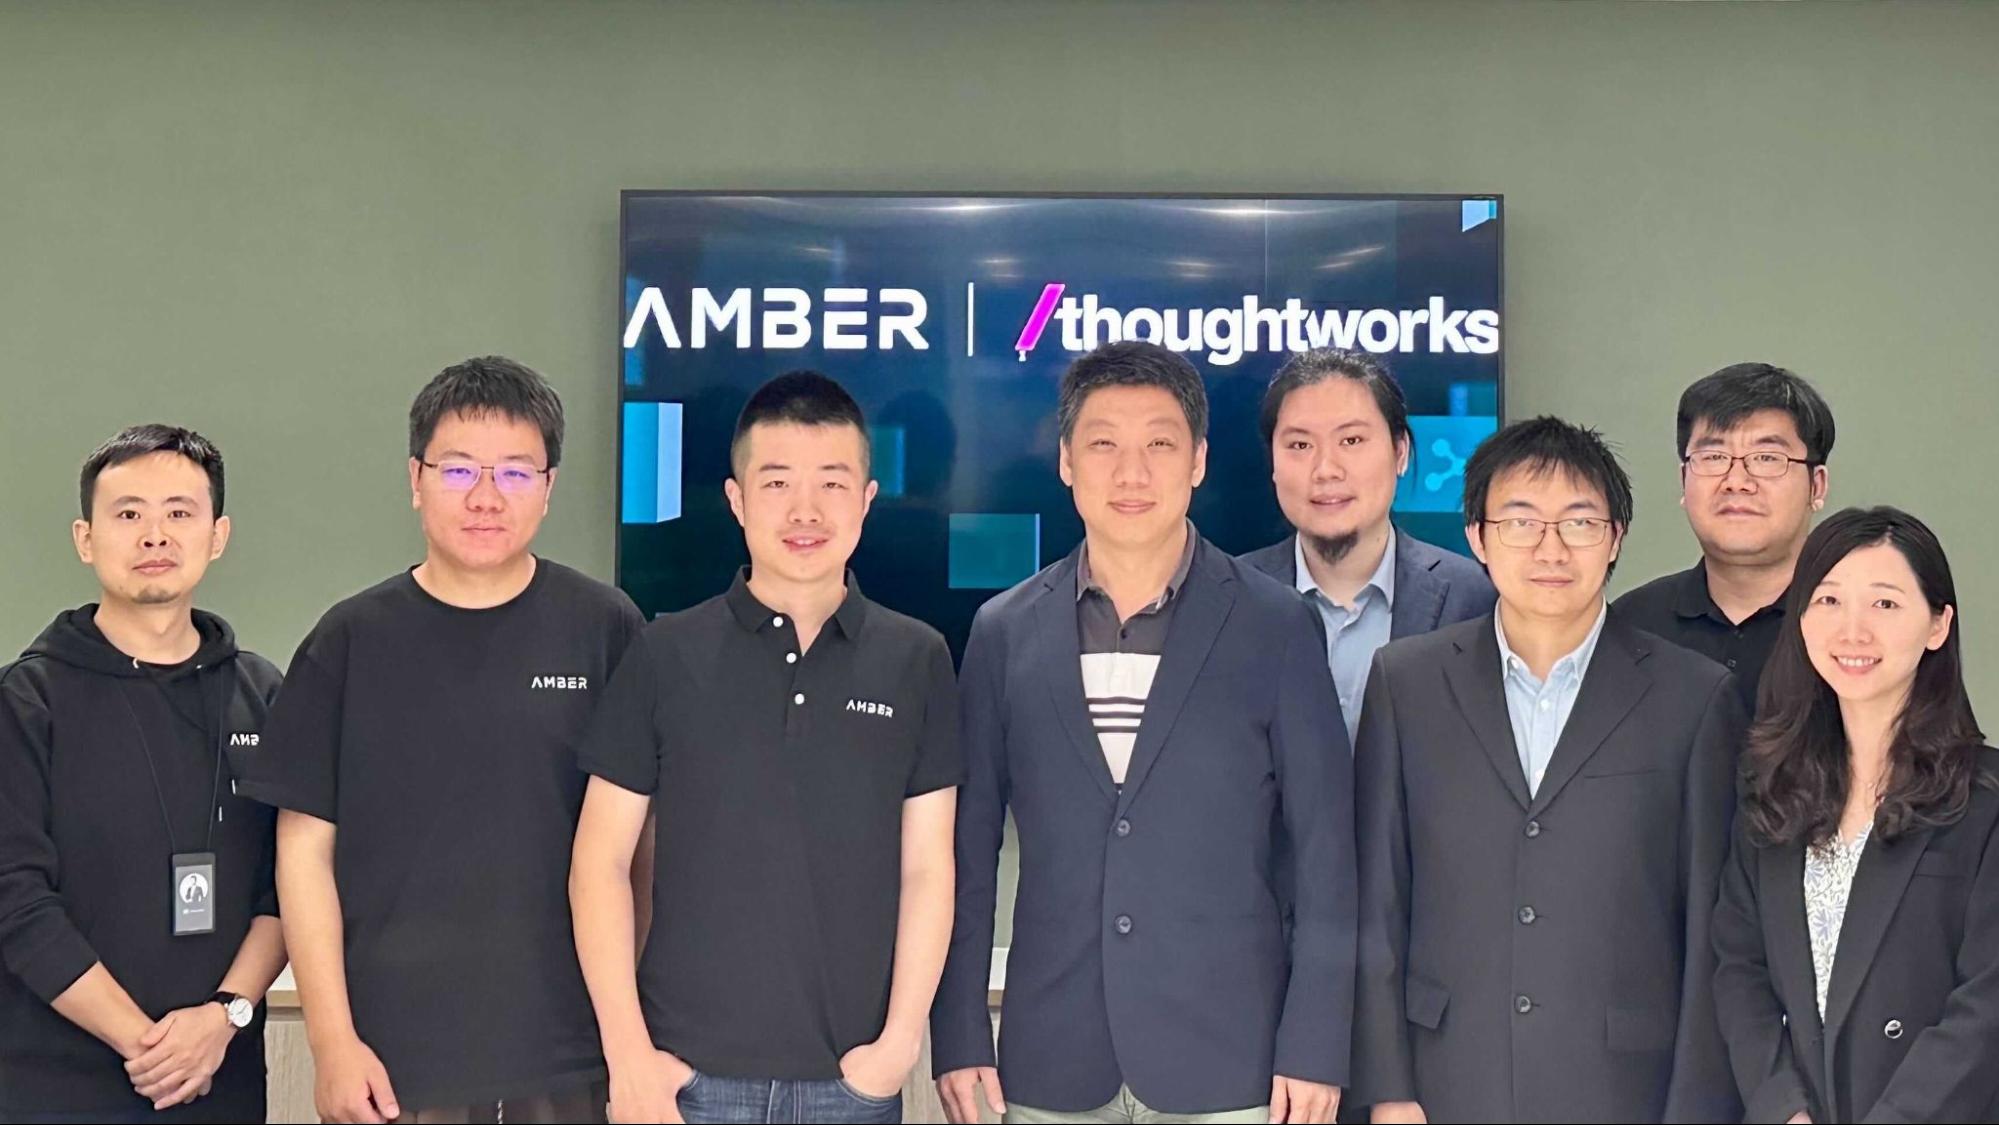 Amber Group and Thoughtworks teams meeting at Amber Office